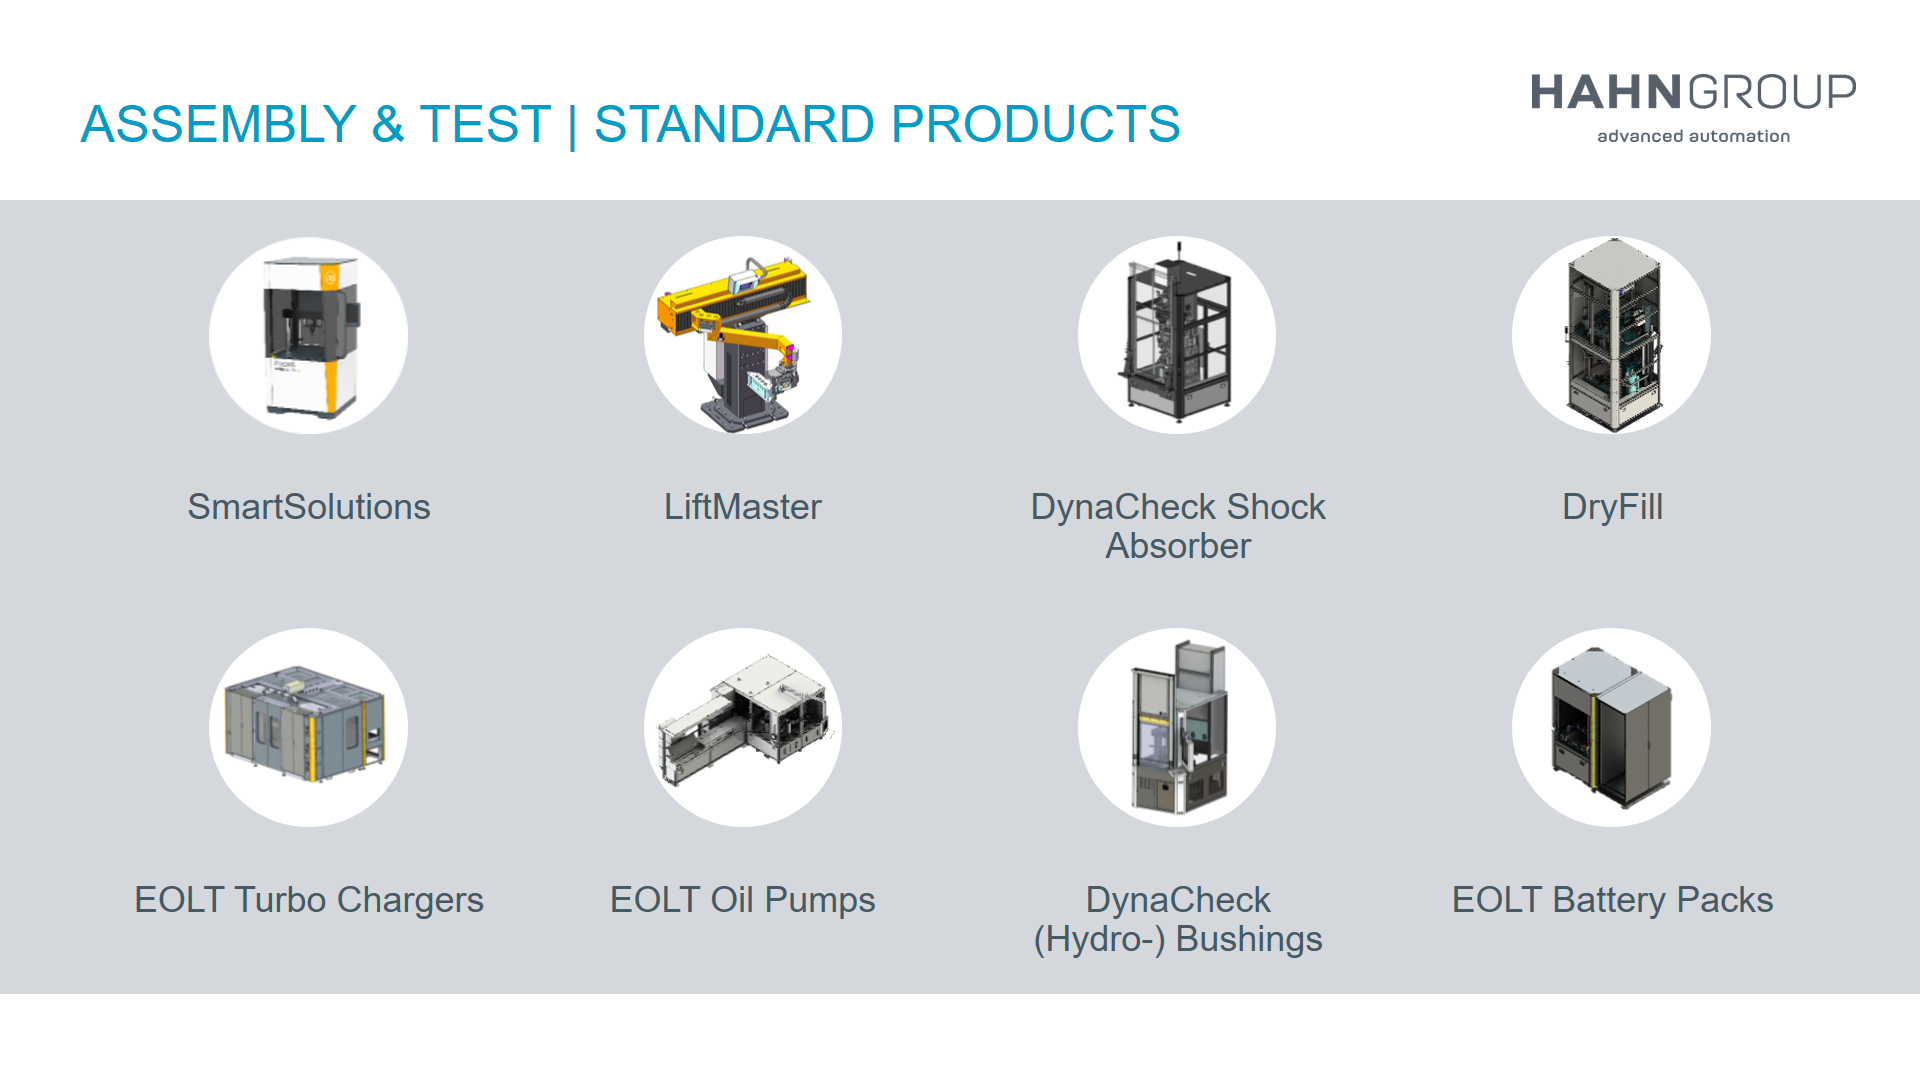 Standard Products of HAHN Group Assembly and Test